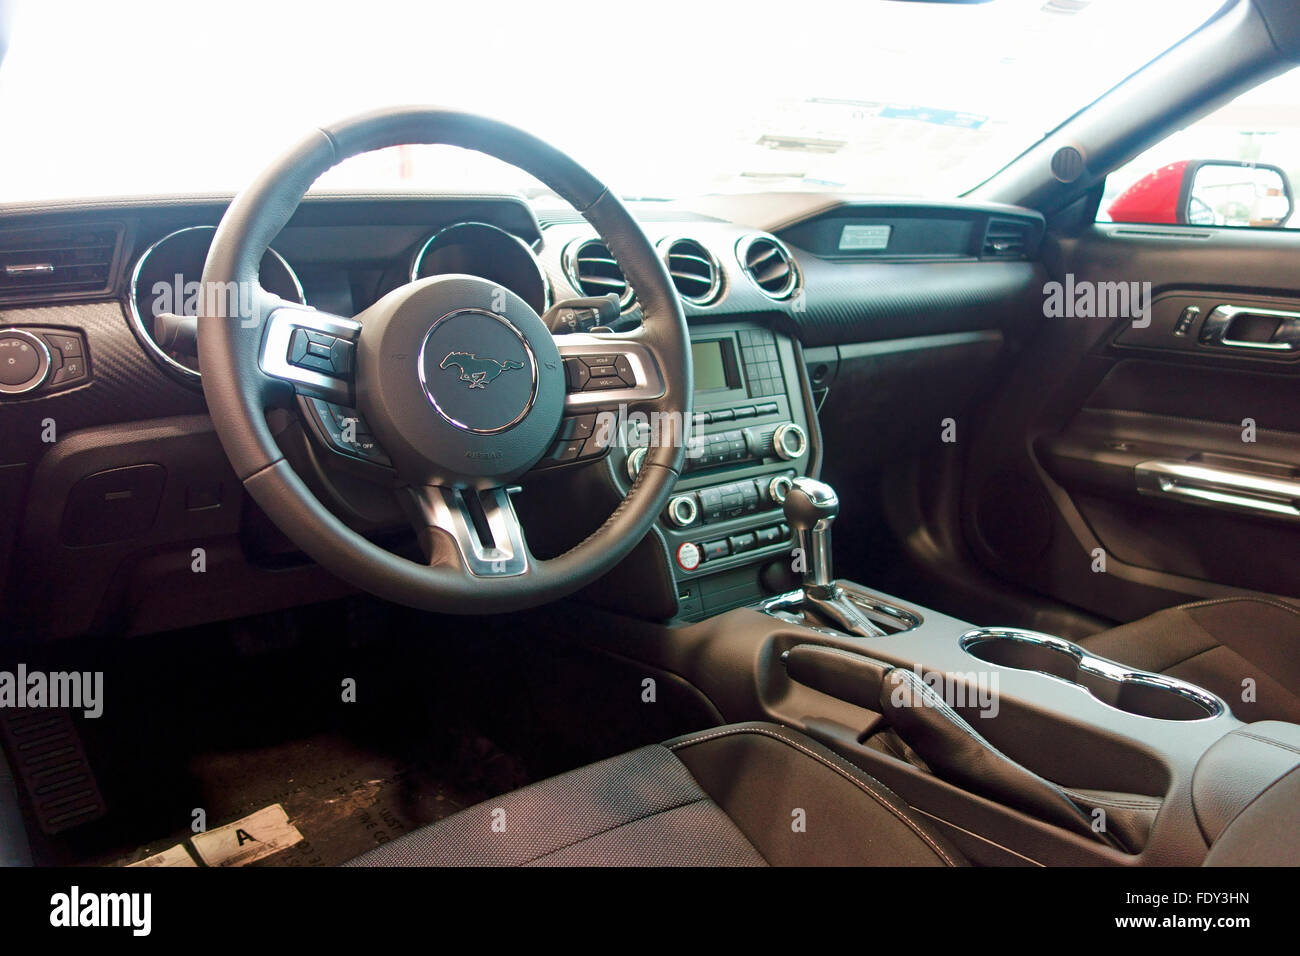 dash steering wheel and interior of a 2016 Ford Mustang car automobile Stock Photo